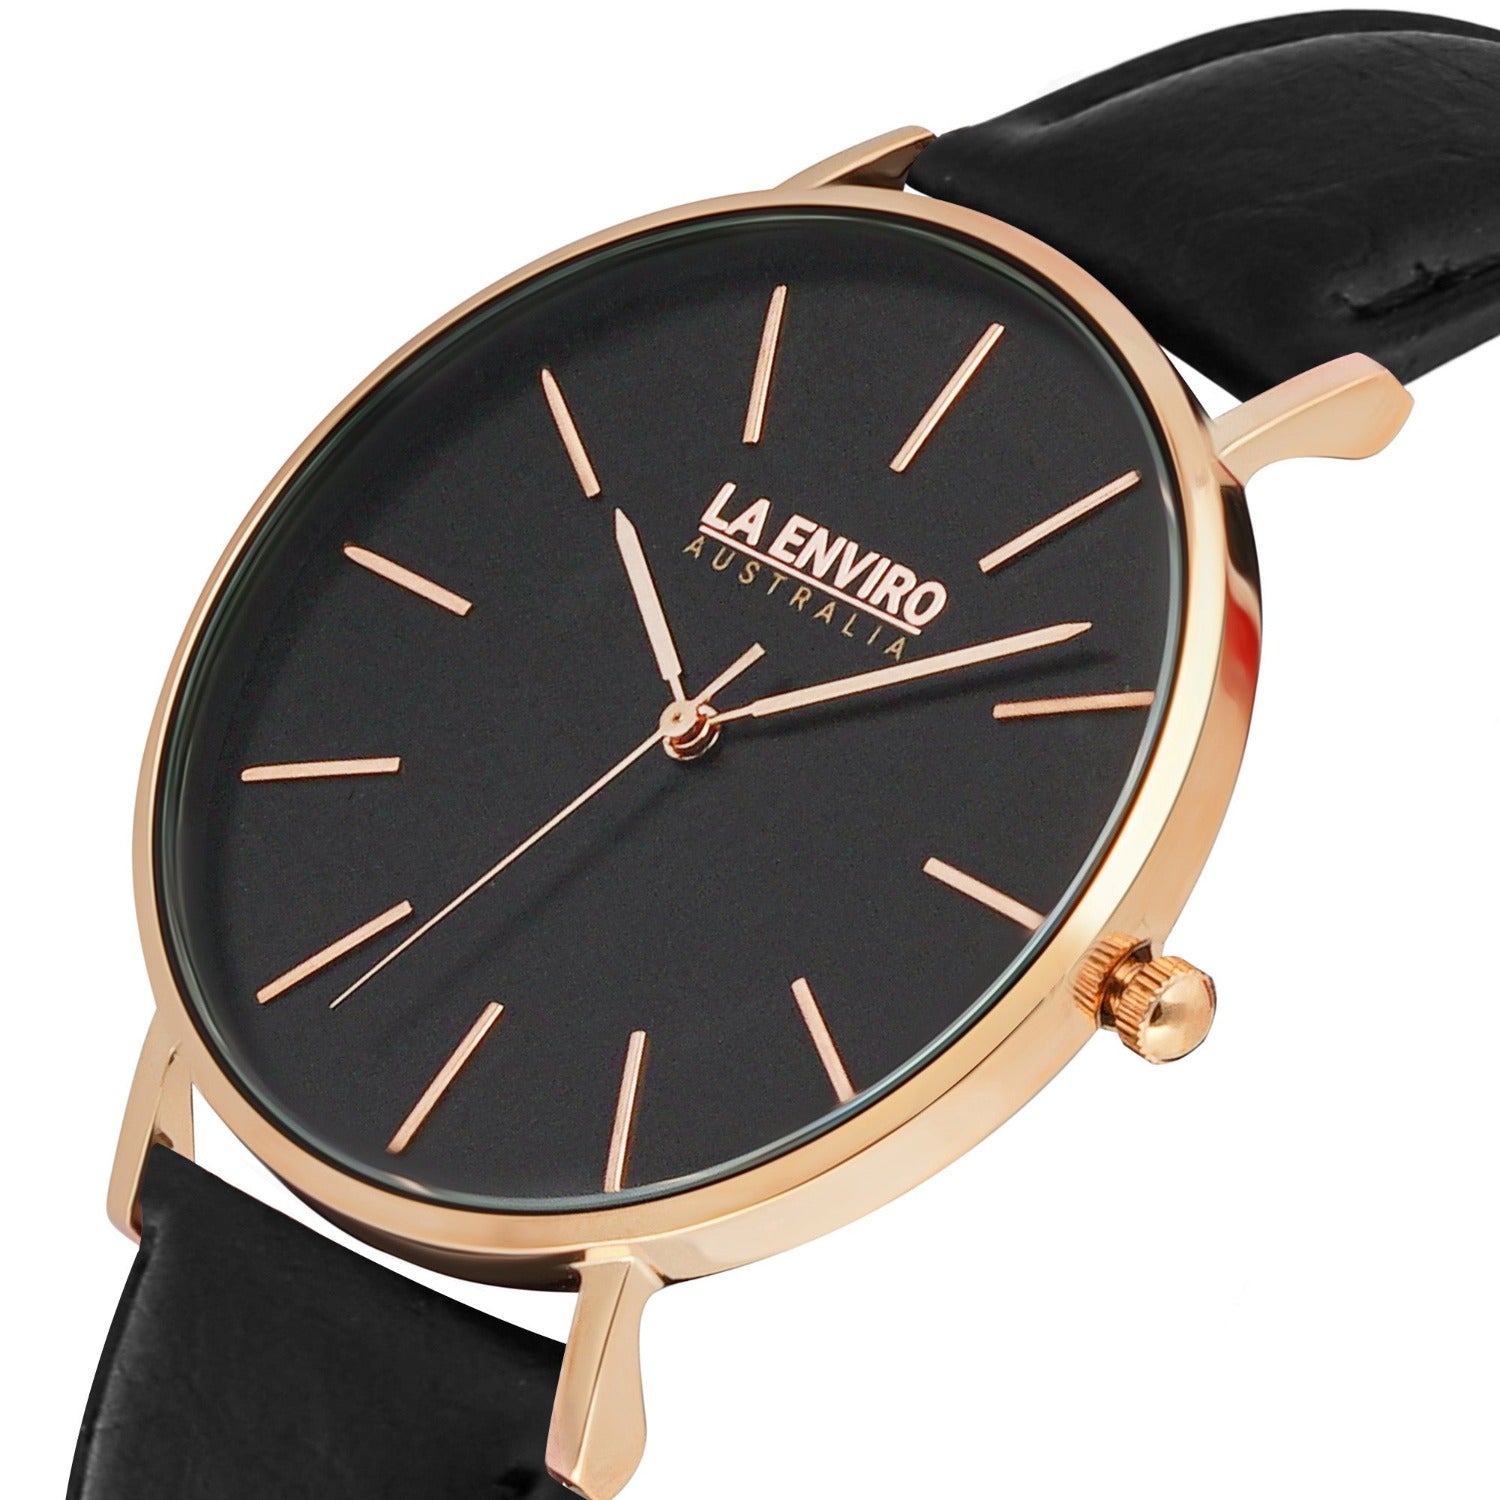 PINEAPPLE LEATHER ROSE GOLD WITH BLACK STRAP I TIERRA 40 MM-La Enviro-stride